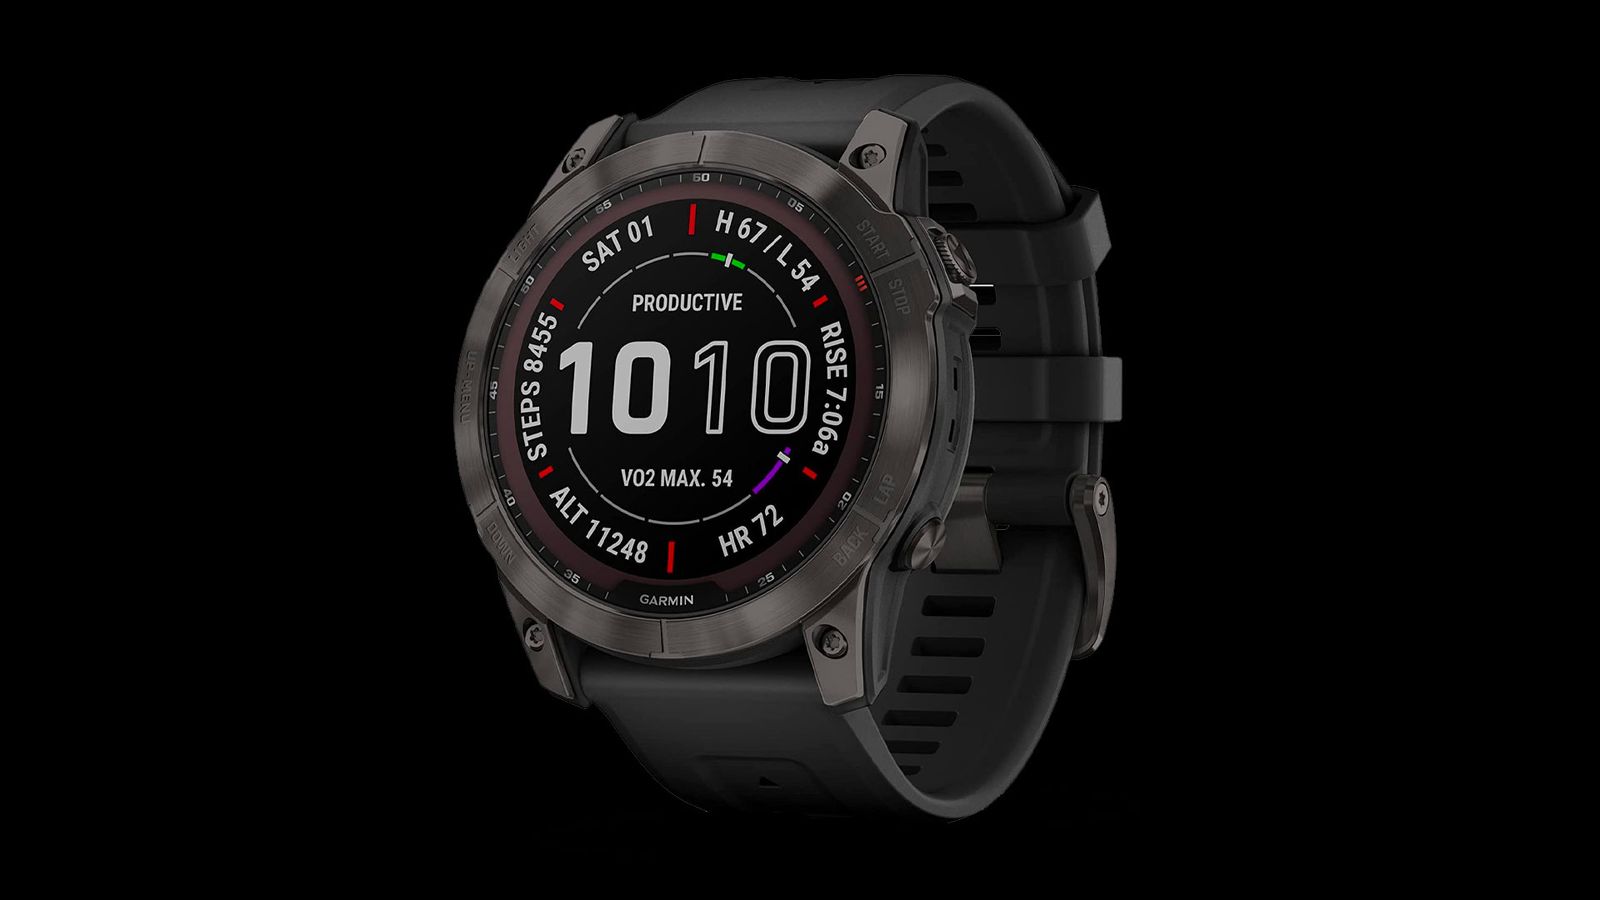 Garmin fēnix 7X Solar Sapphire product image of a black smartwatch with the time on the display along with the altitude, rise, etc.